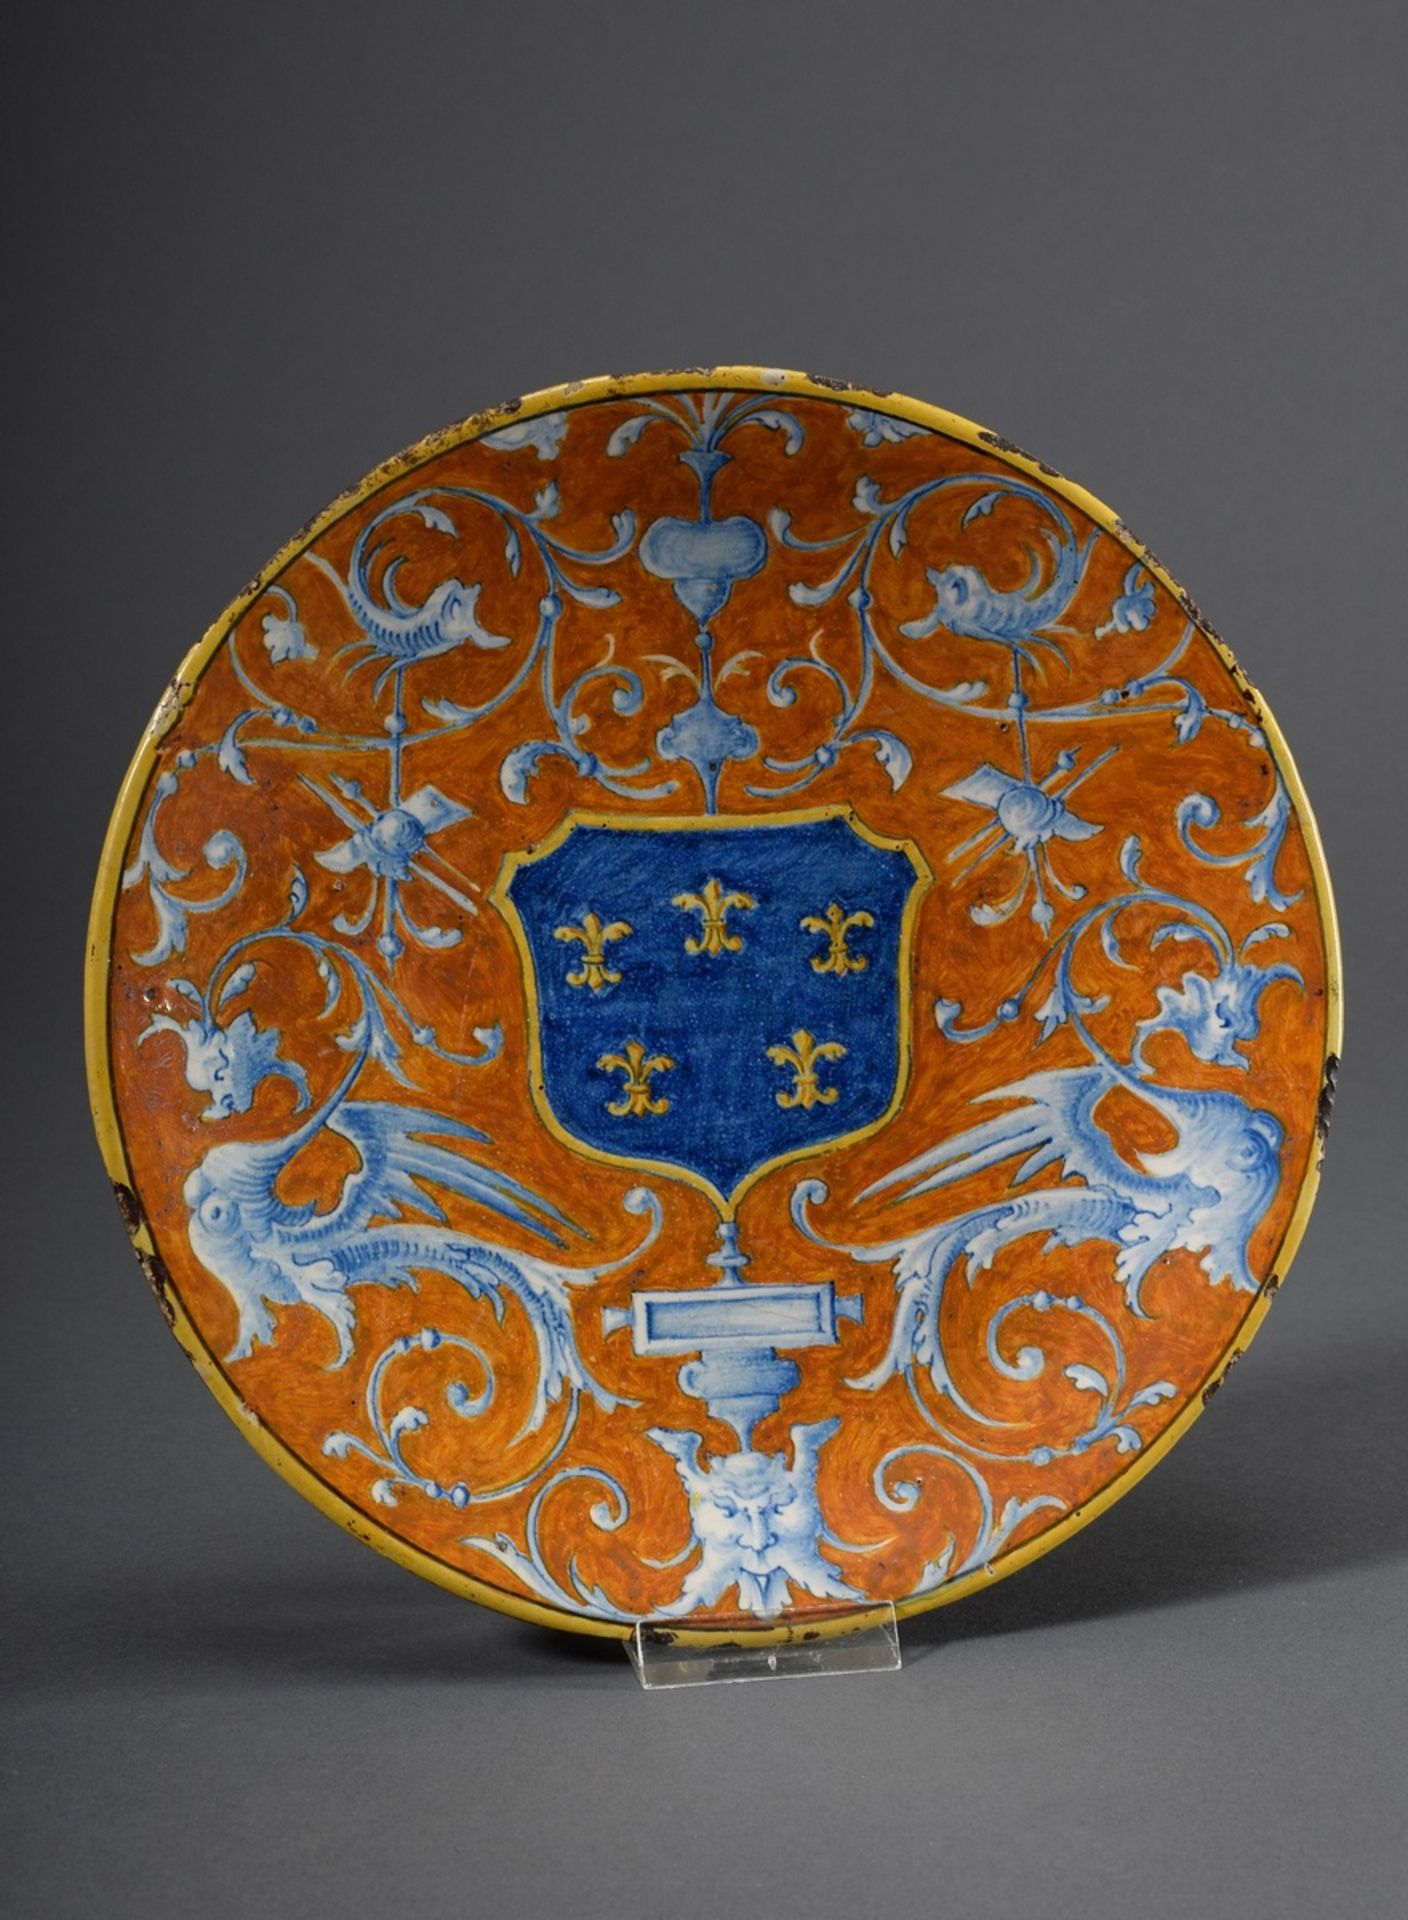 Italian majolica plate with grotesque decoration and coat of arms "Five Fleur-d-lis on a blue groun